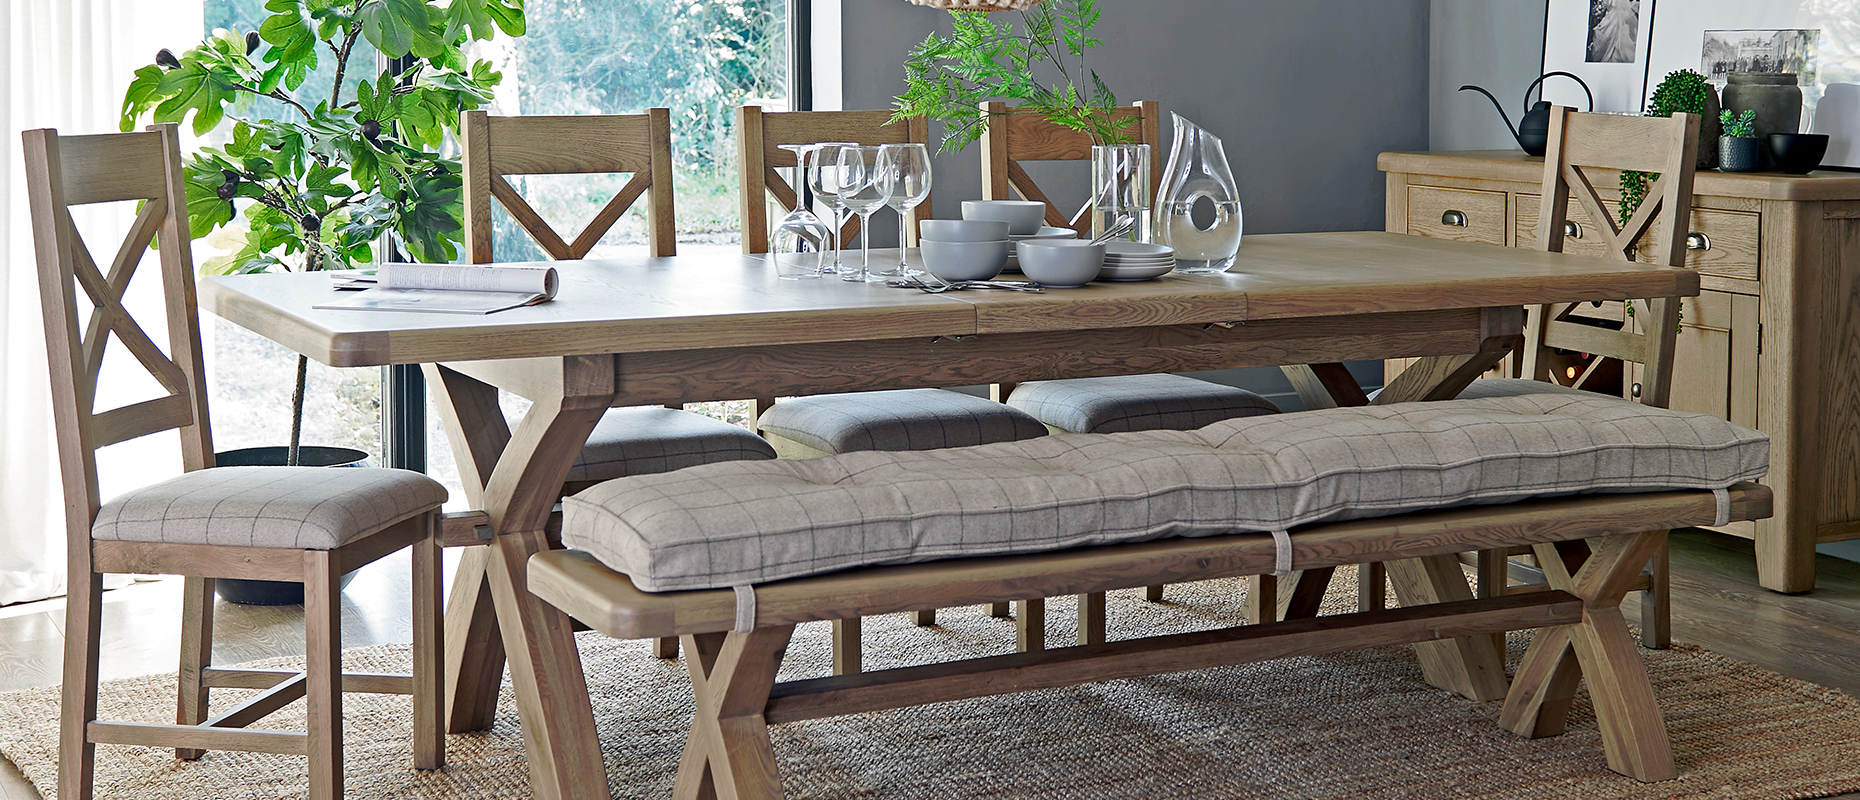 Ryedale dining Collection at Forrest Furnishing